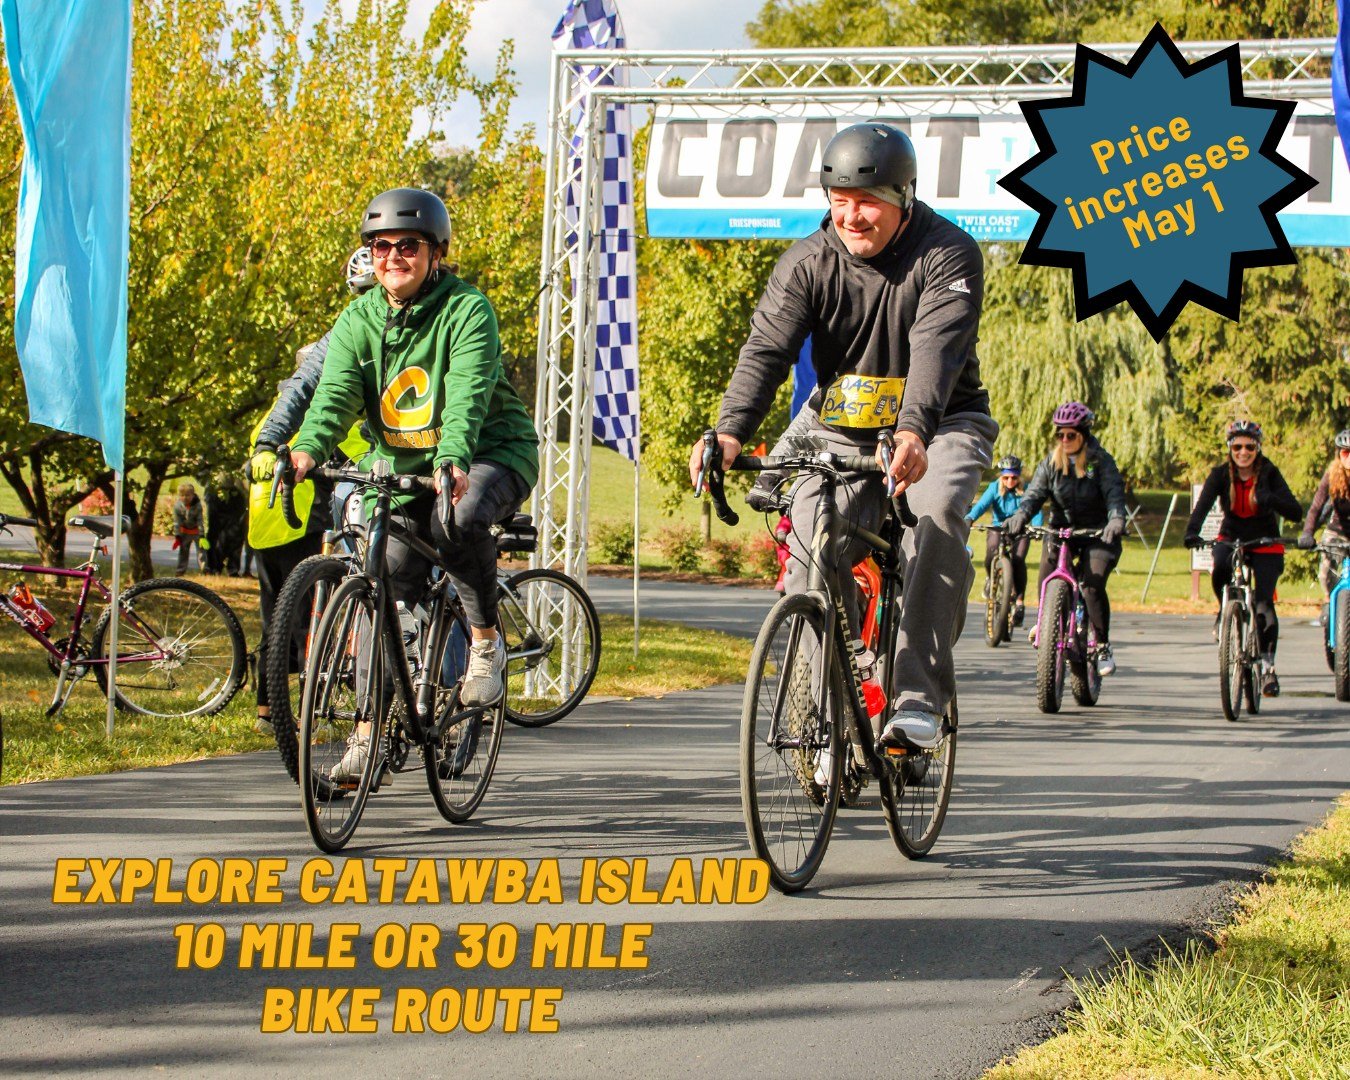 Keep the outdoor riding season going by registering for Coast to the Oast on Saturday, September 14!

This event starts and finishes at Twin Oast Brewing! 

This is a ride for ages 13 and over due to riding in the roadways and abilities with clearly 